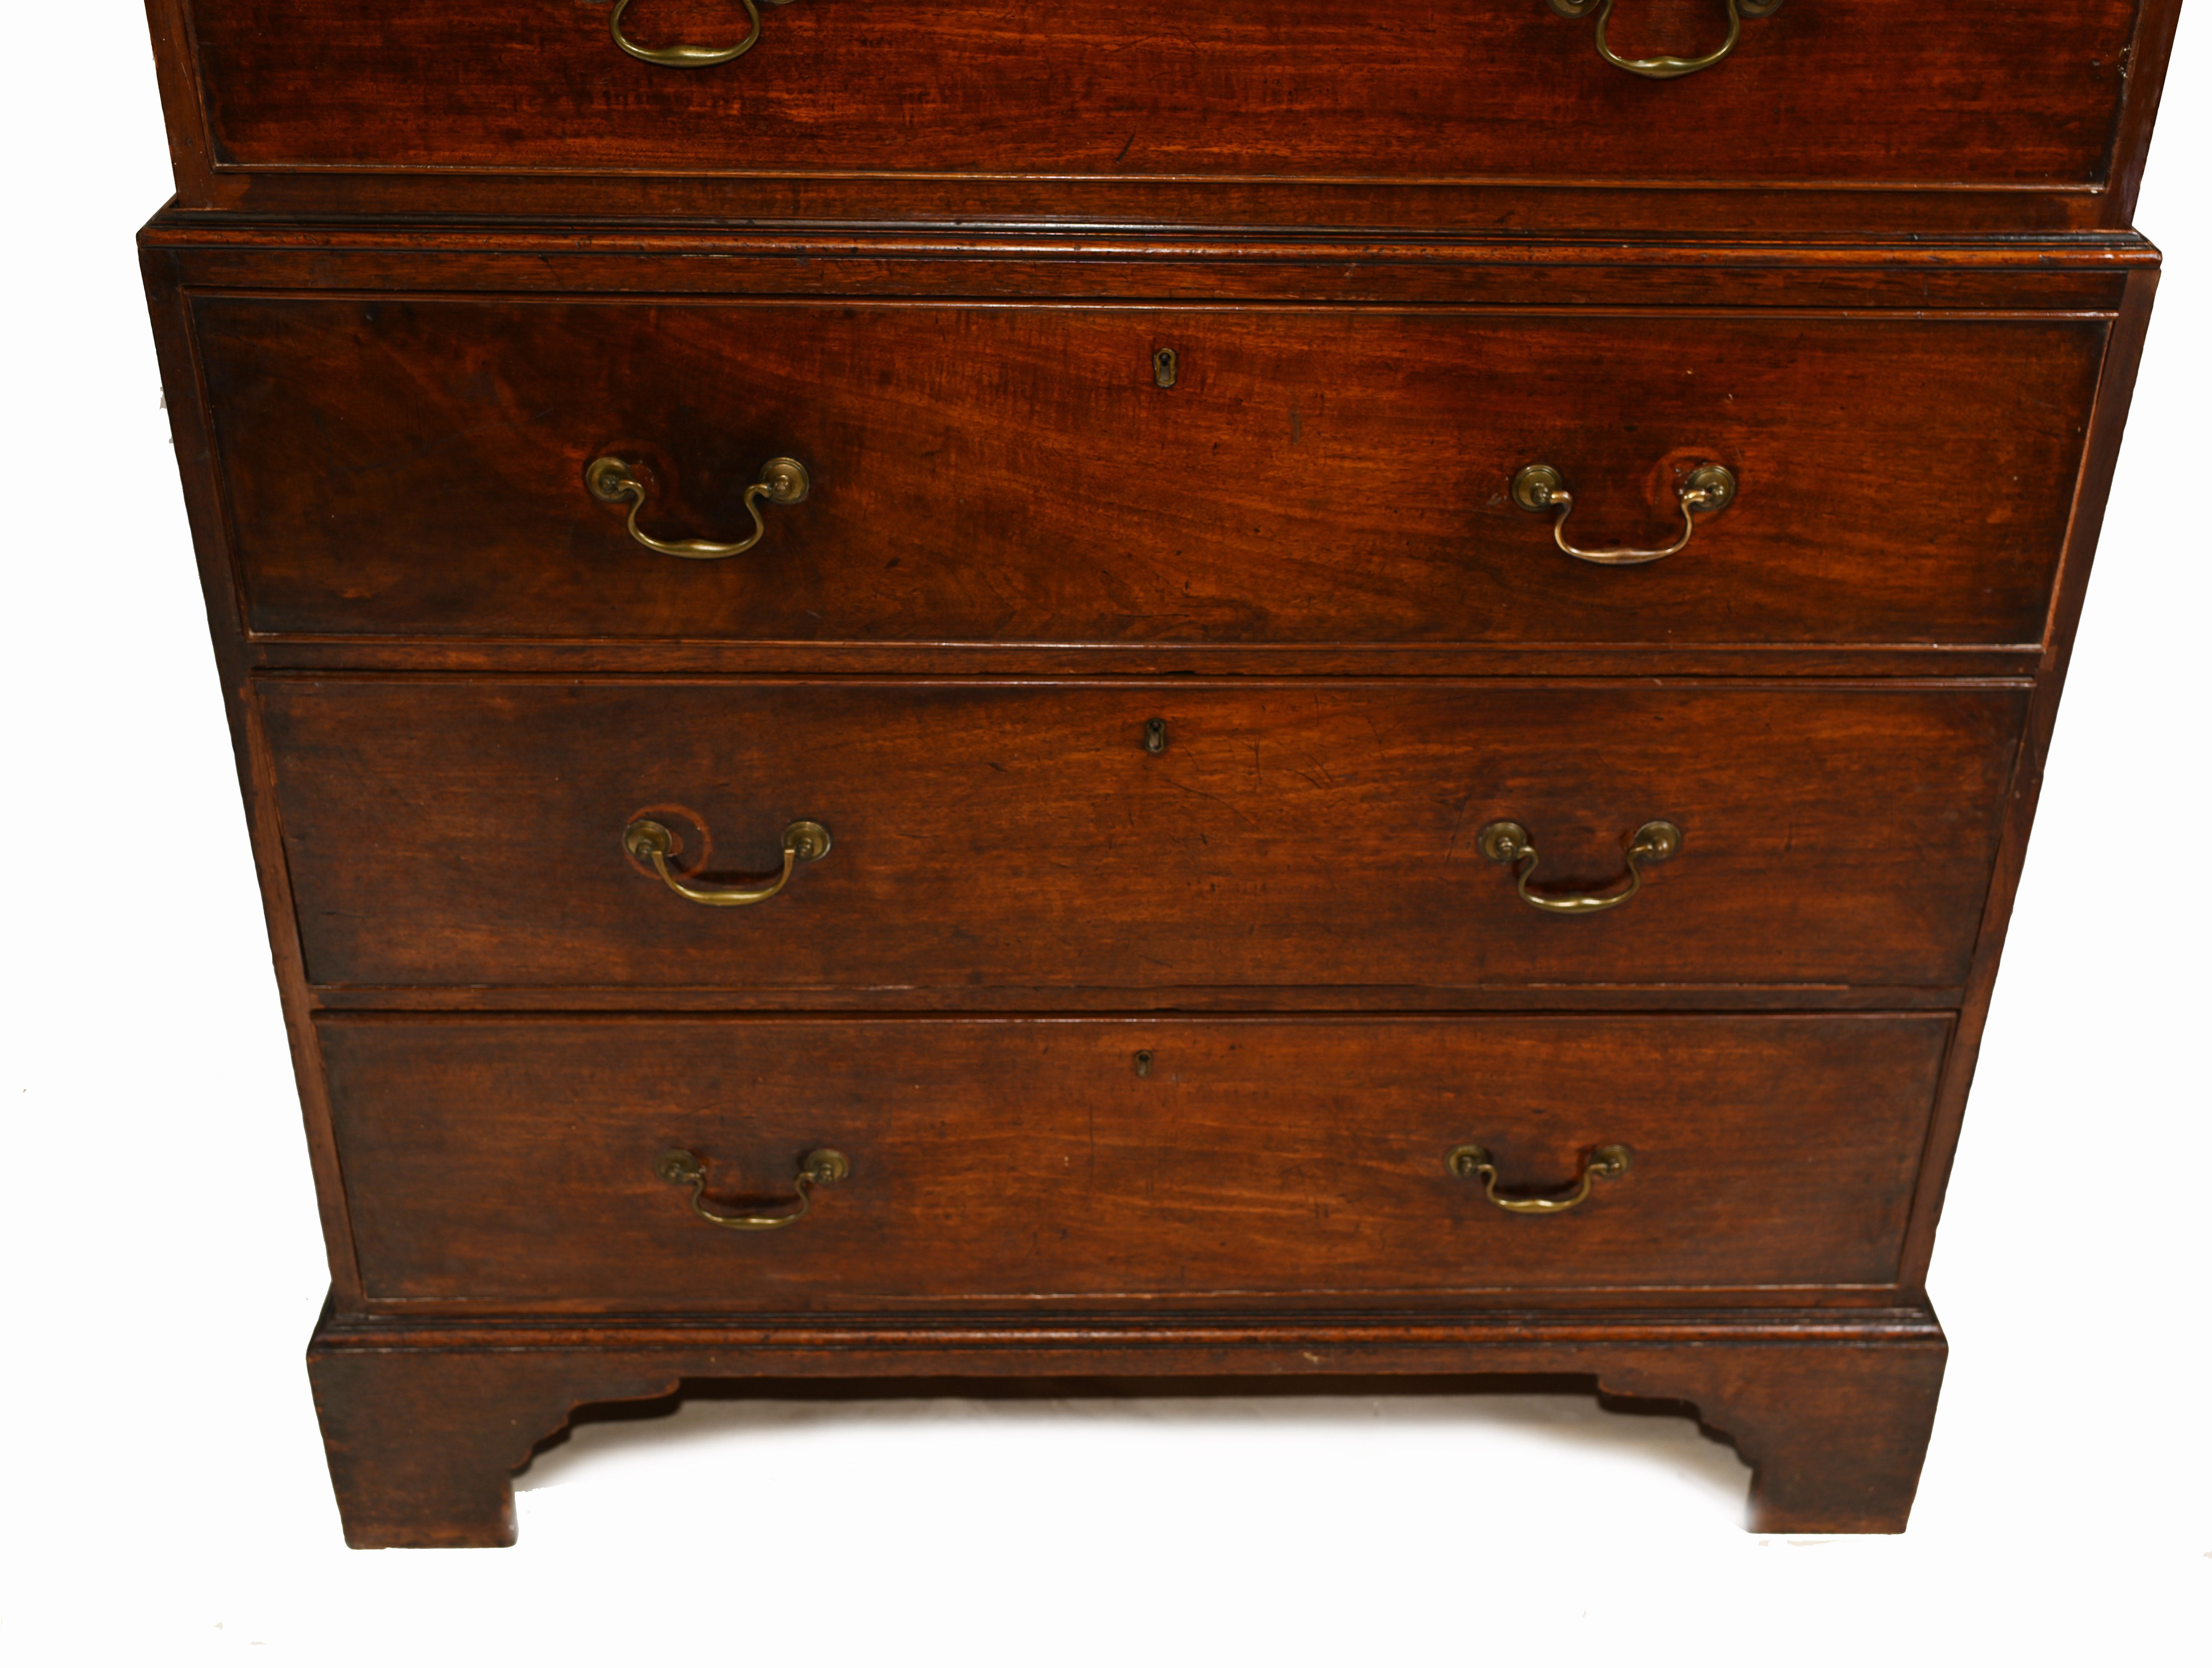 A mahogany Georgian chest on chest with orignal drop handles terminating on bracket feet.
Comes in two parts so can be moved around easily
Circa 1820 on this fine piece of English furniture
Great patina to the wood.


 